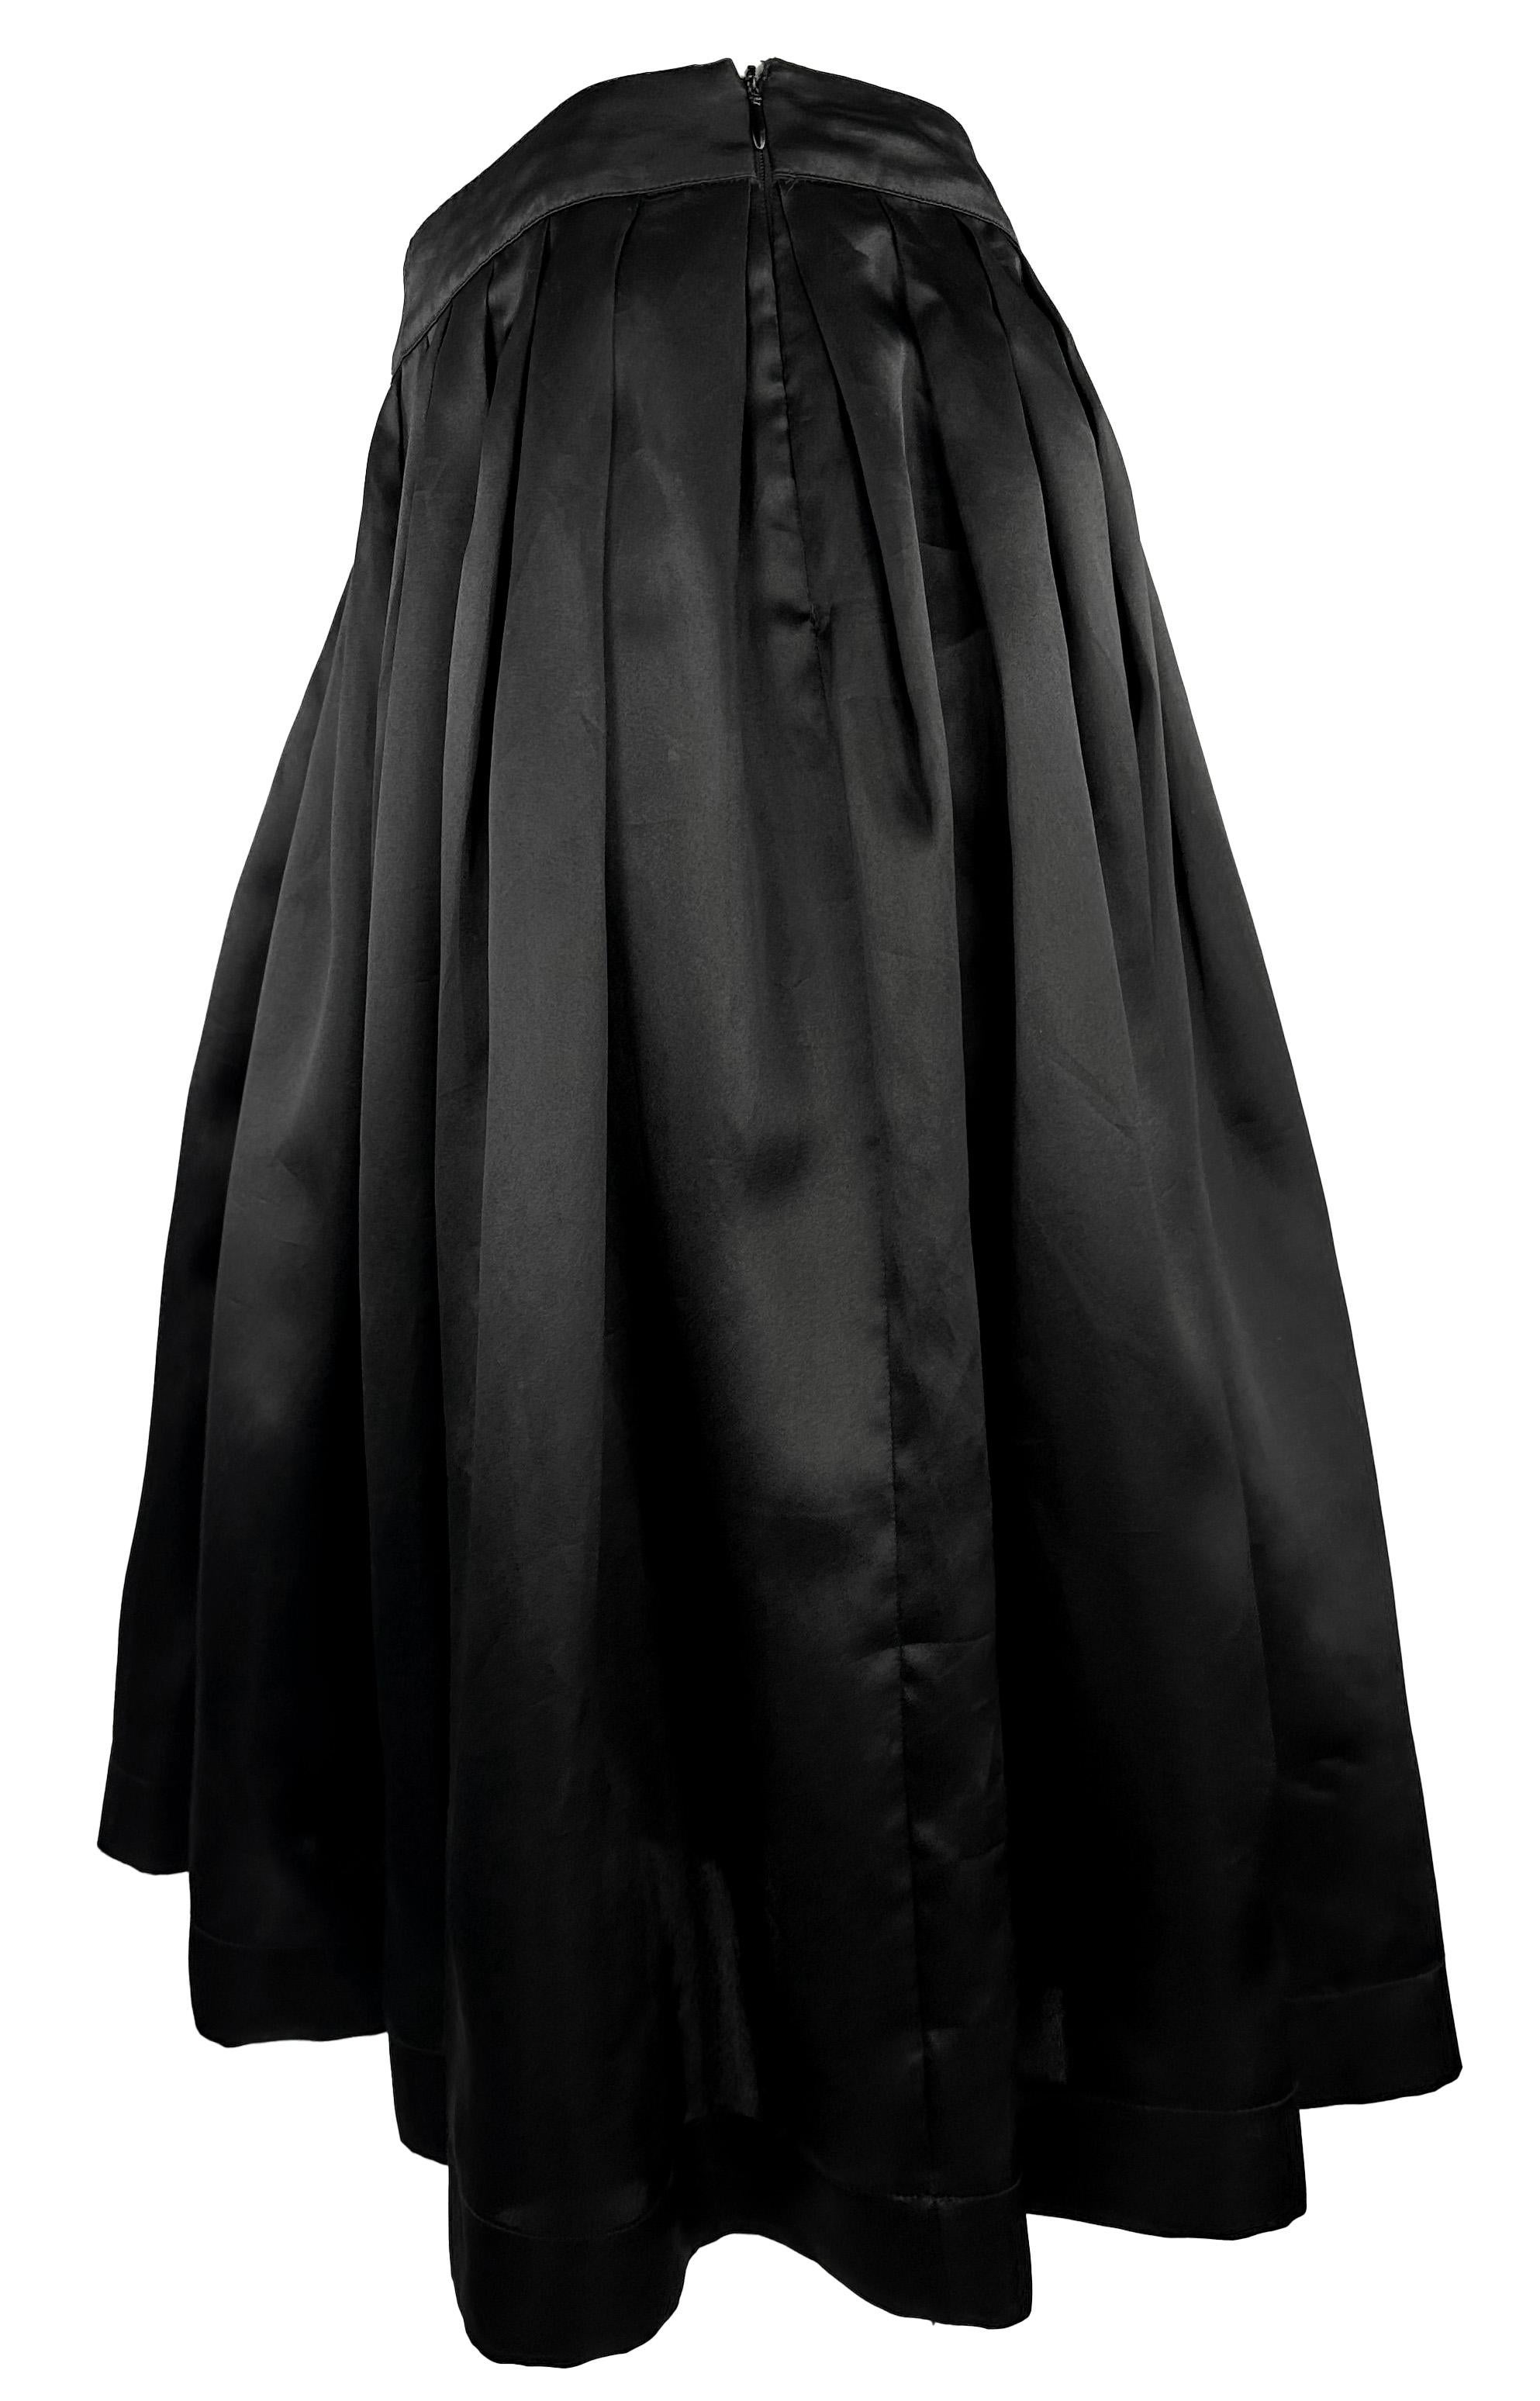 Women's S/S 1995 Gucci by Tom Ford Runway Black Silk Satin Pleated Flare Skirt For Sale